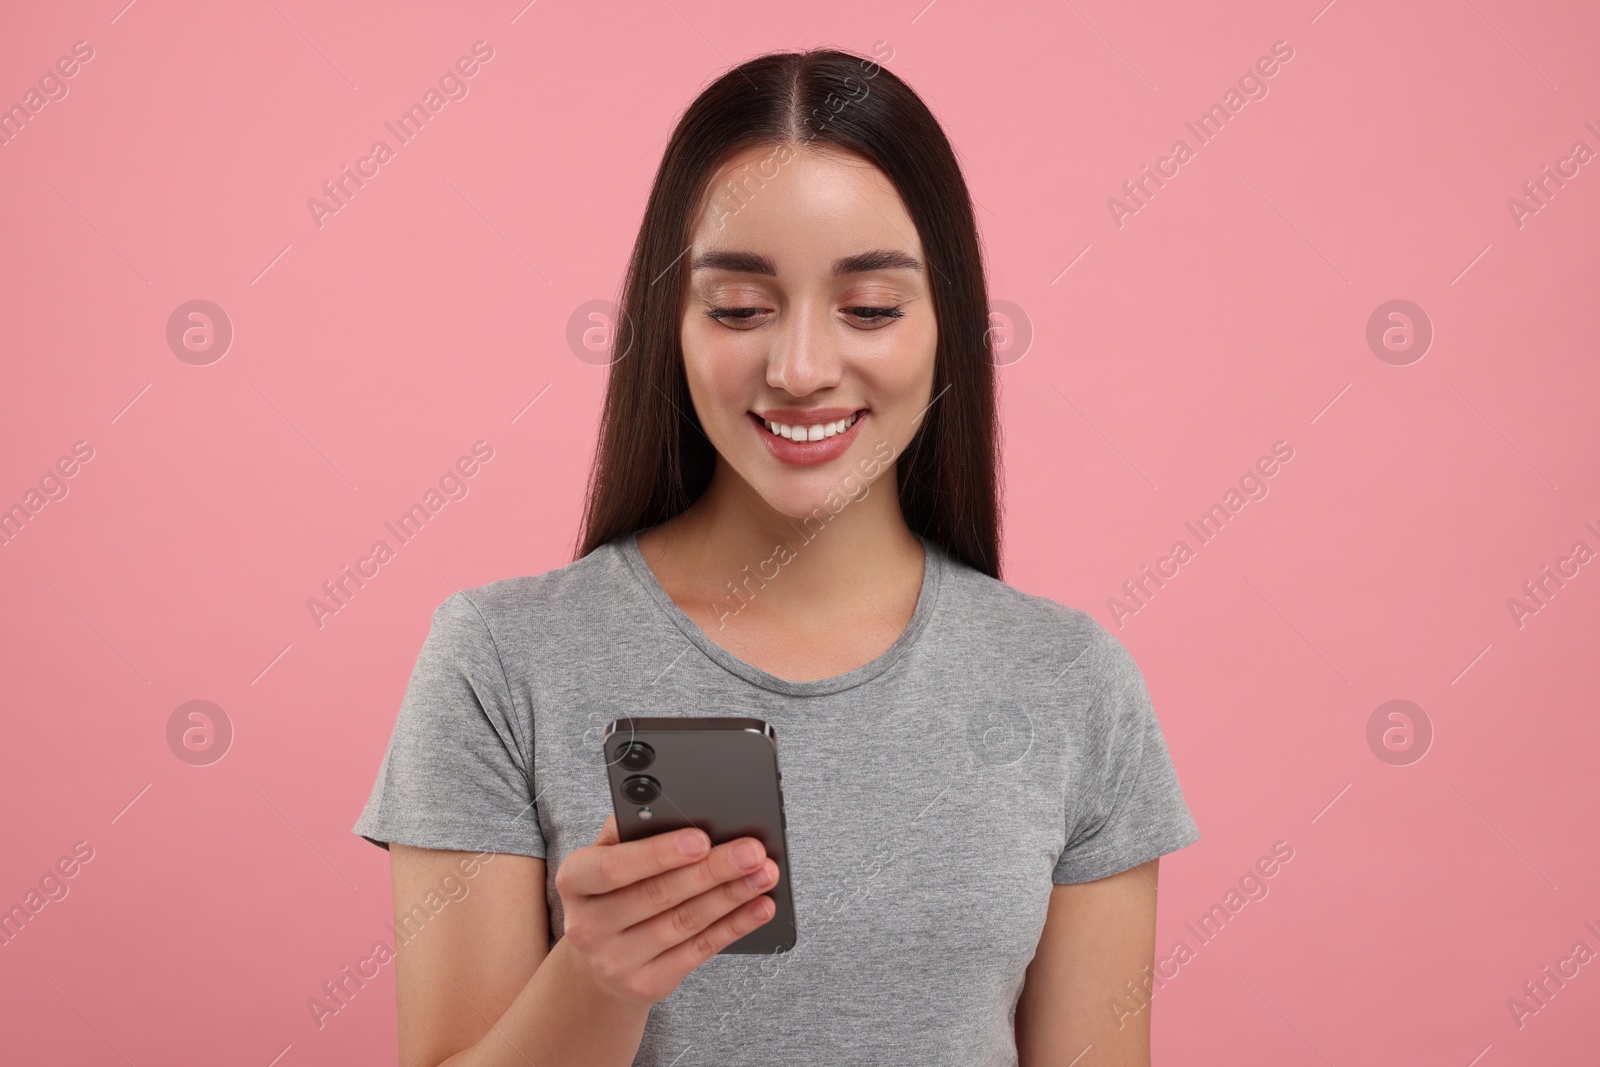 Photo of Happy young woman looking at smartphone on pink background